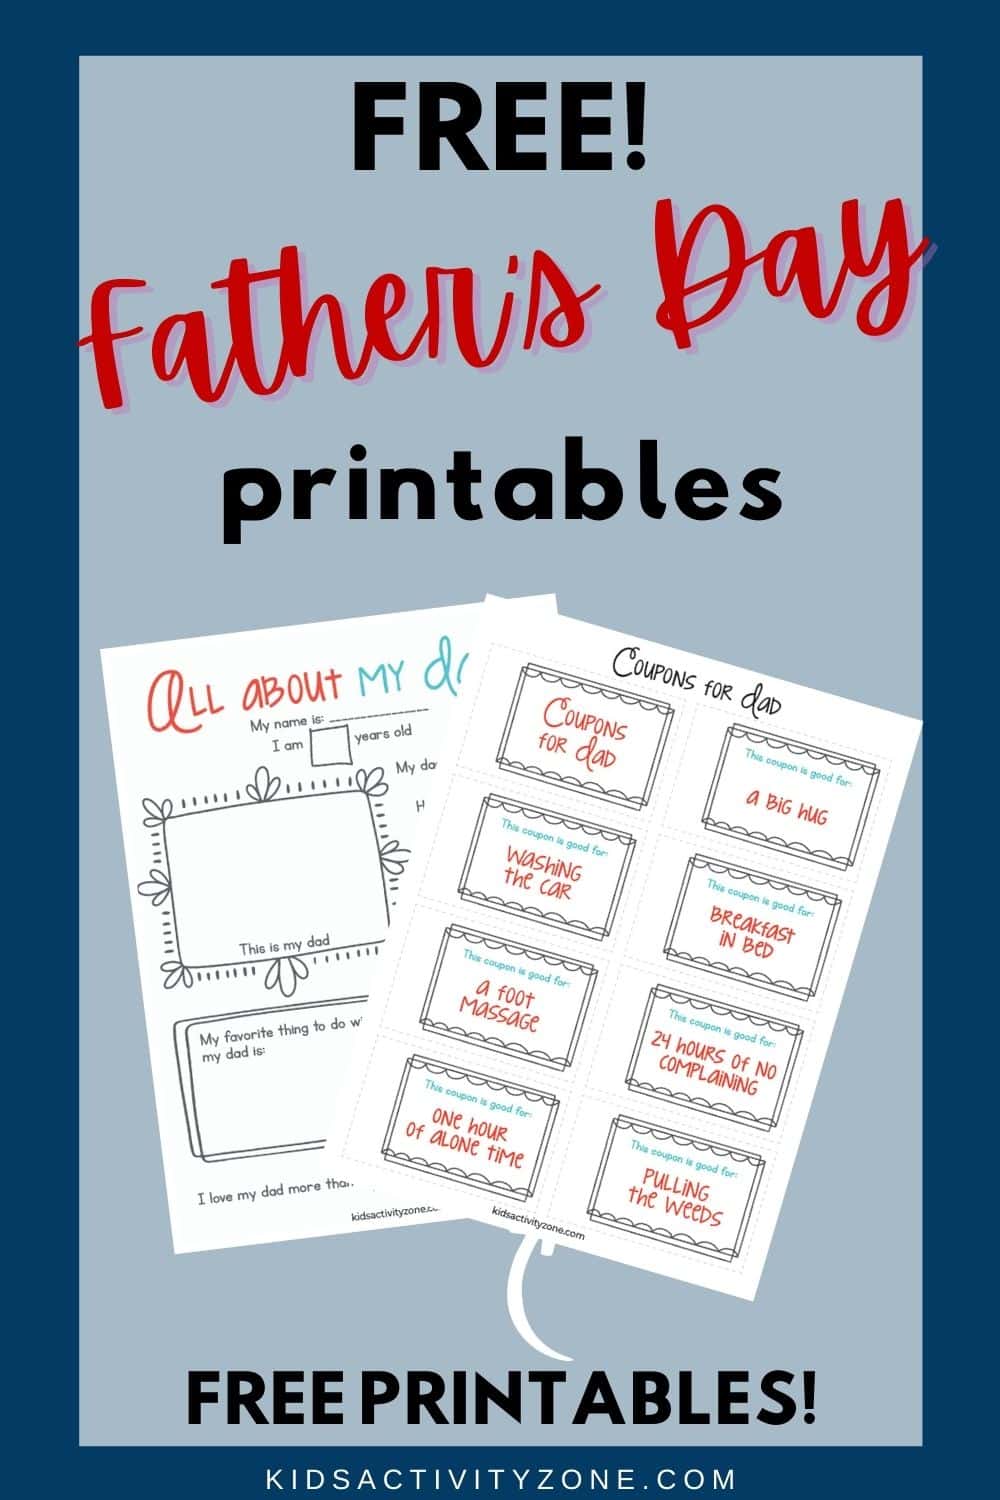 These fun free Father's Day Printables include an "All About My Dad" sheet to fill out, coupon book and Father's Day Card. Perfect keepsake for Dad on Father's Day!